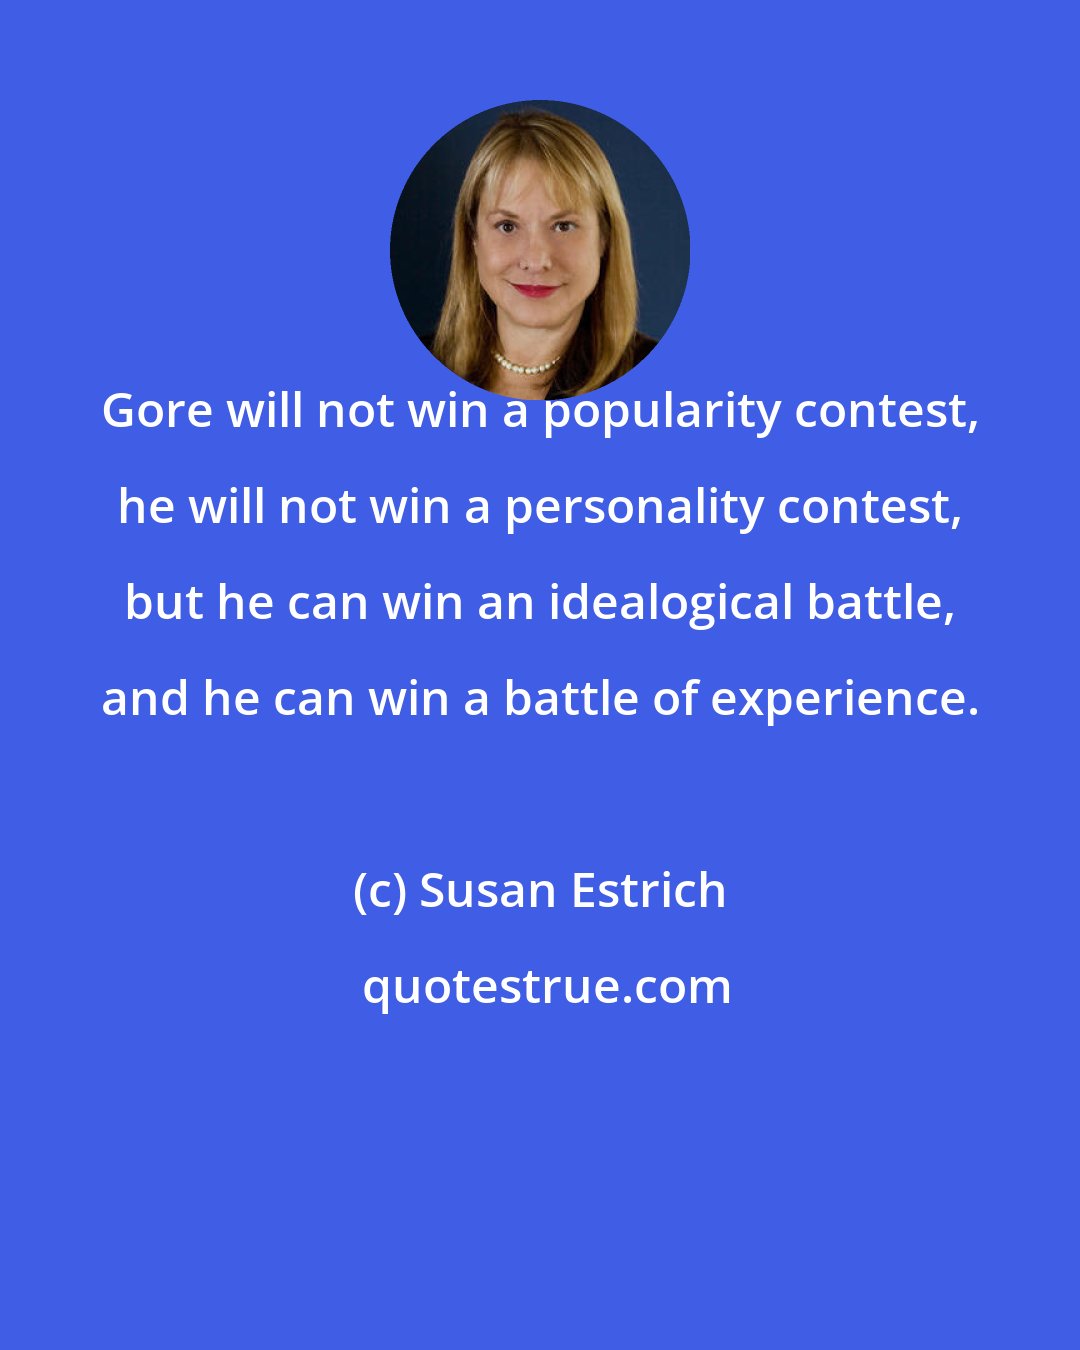 Susan Estrich: Gore will not win a popularity contest, he will not win a personality contest, but he can win an idealogical battle, and he can win a battle of experience.